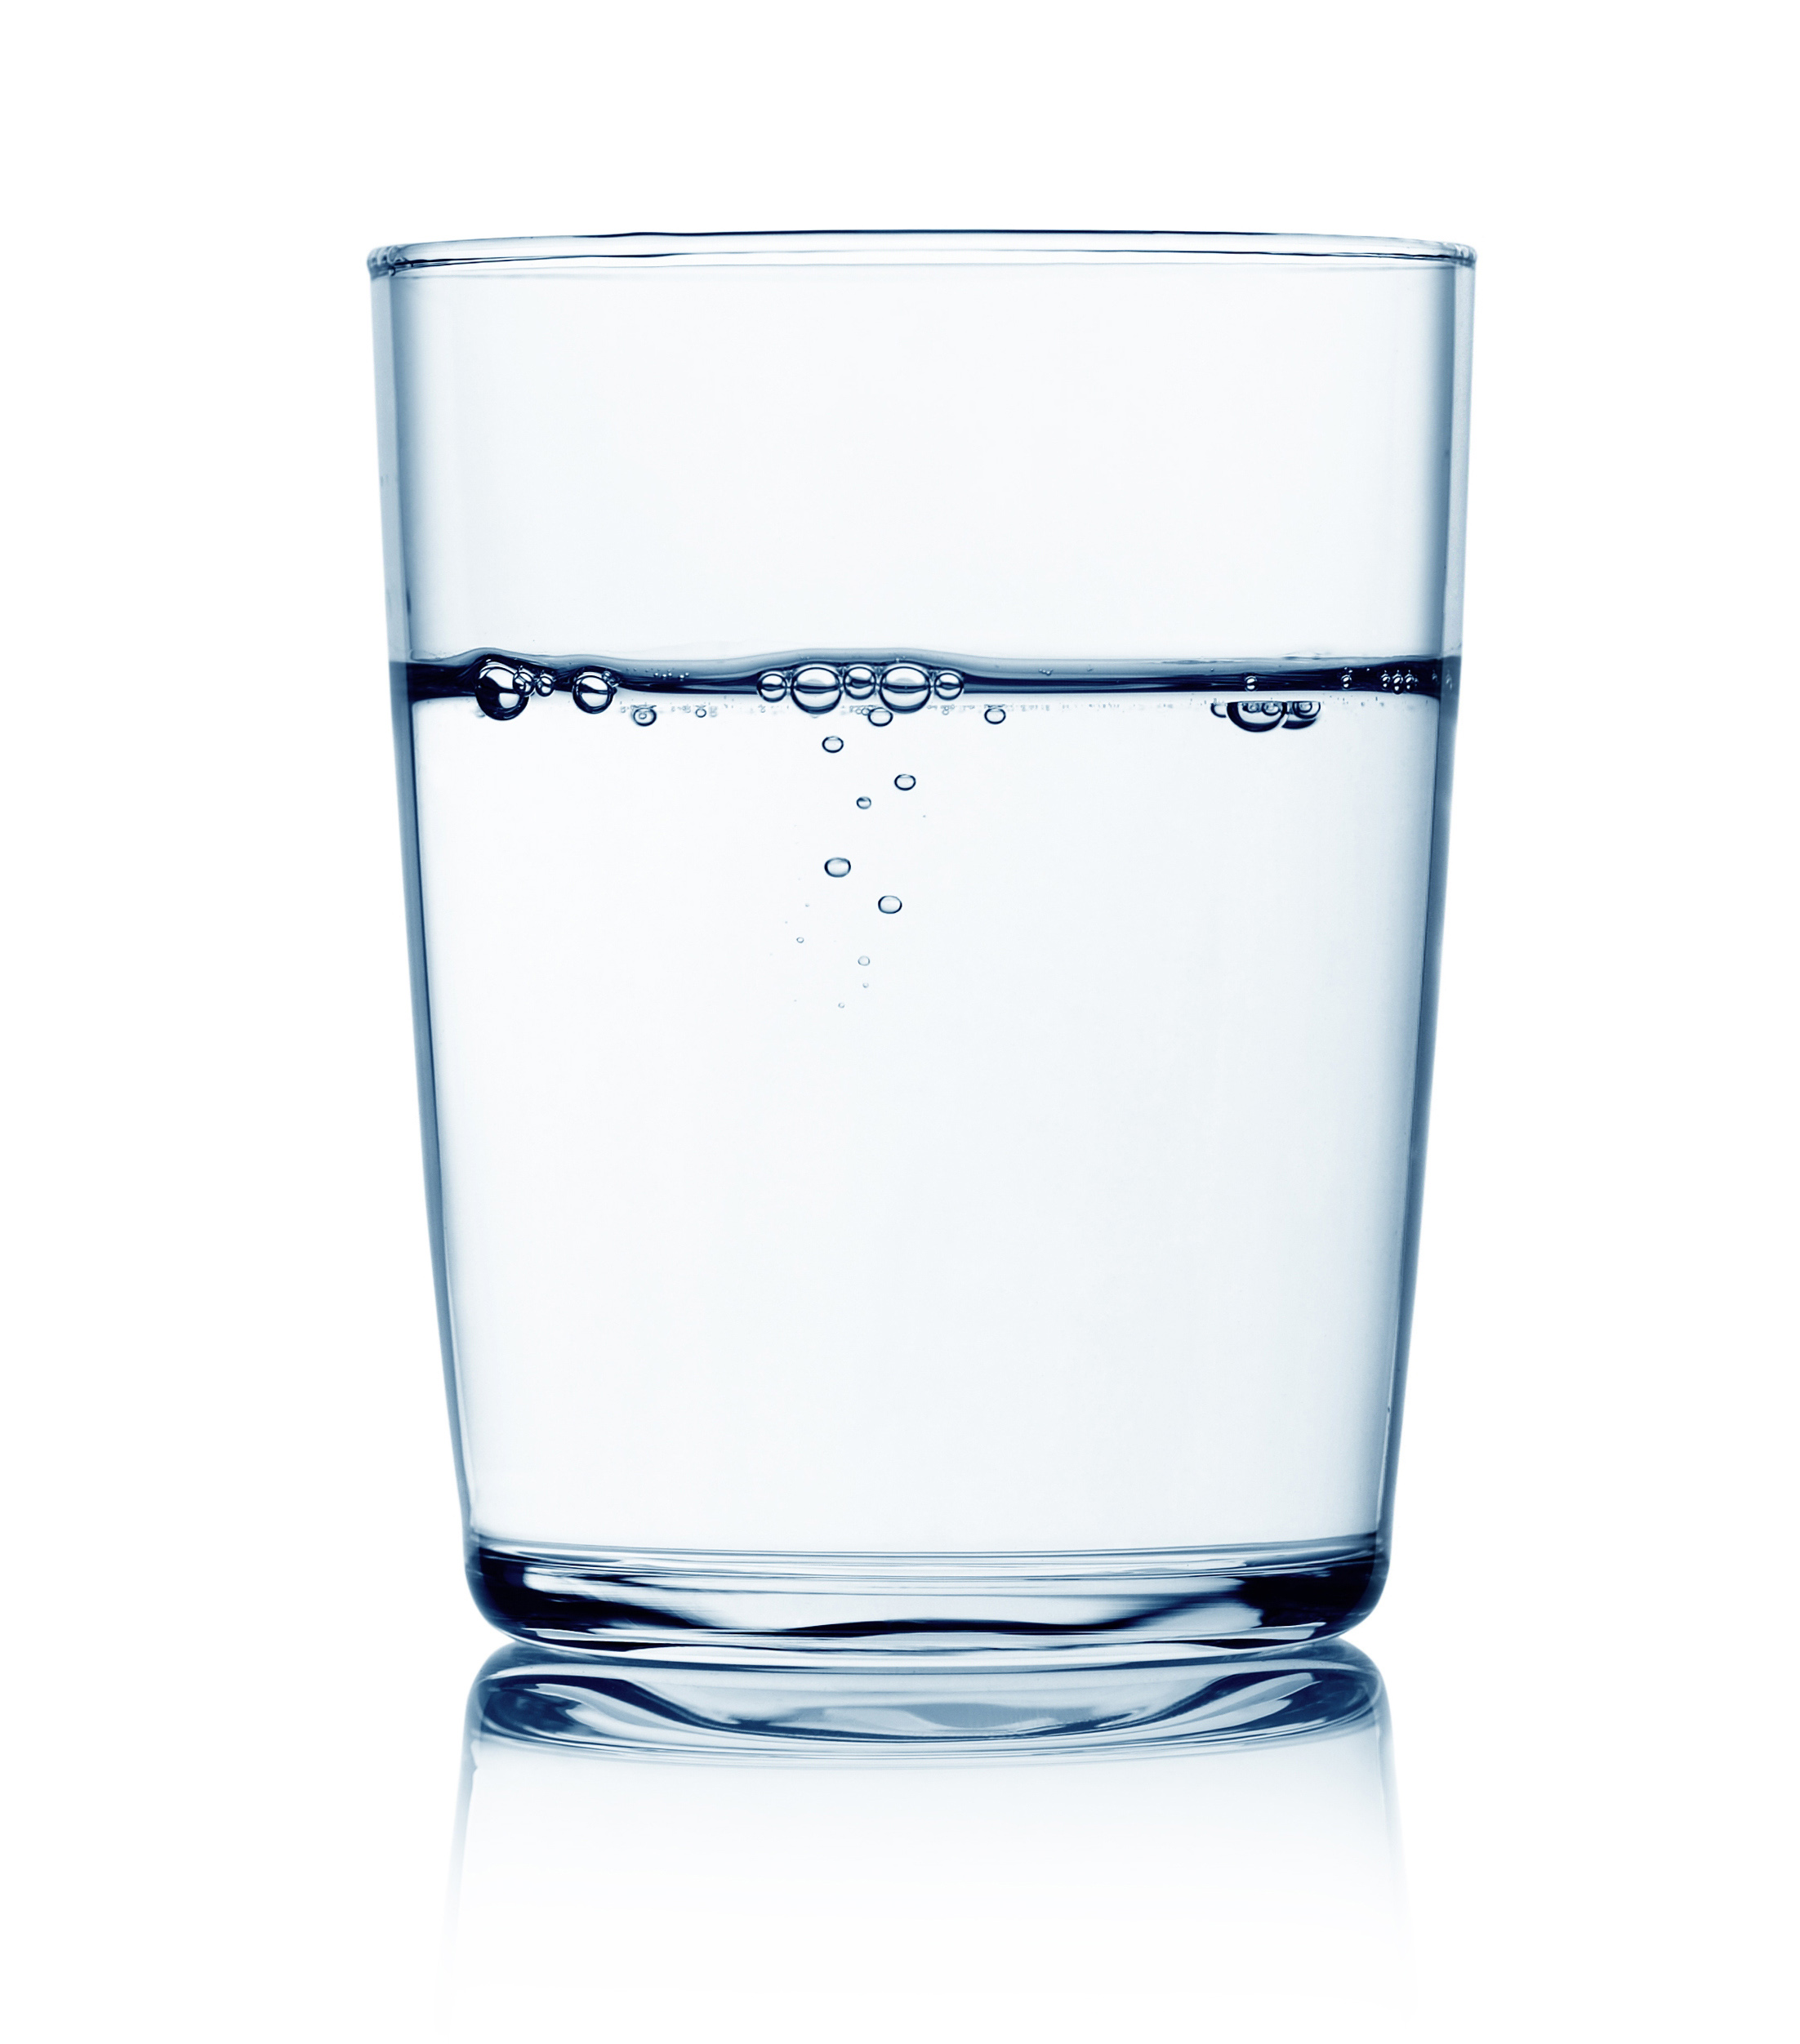 glass of water - United Way of Greater St. Louis